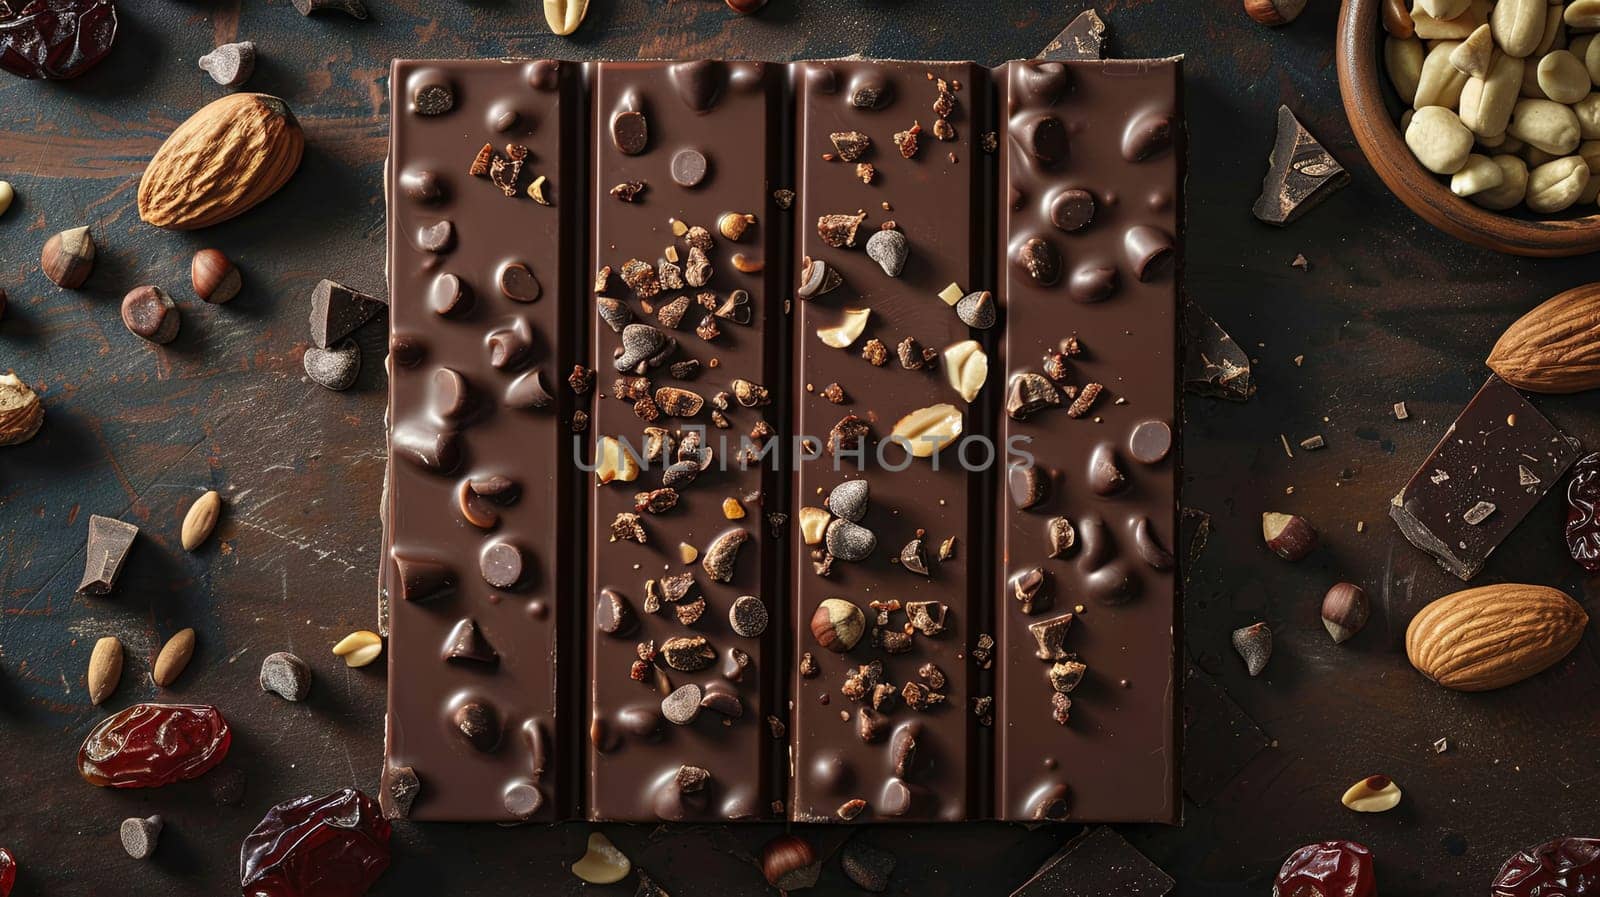 A chocolate bar enriched with nuts and cranberries in a tempting display of textures and flavors.